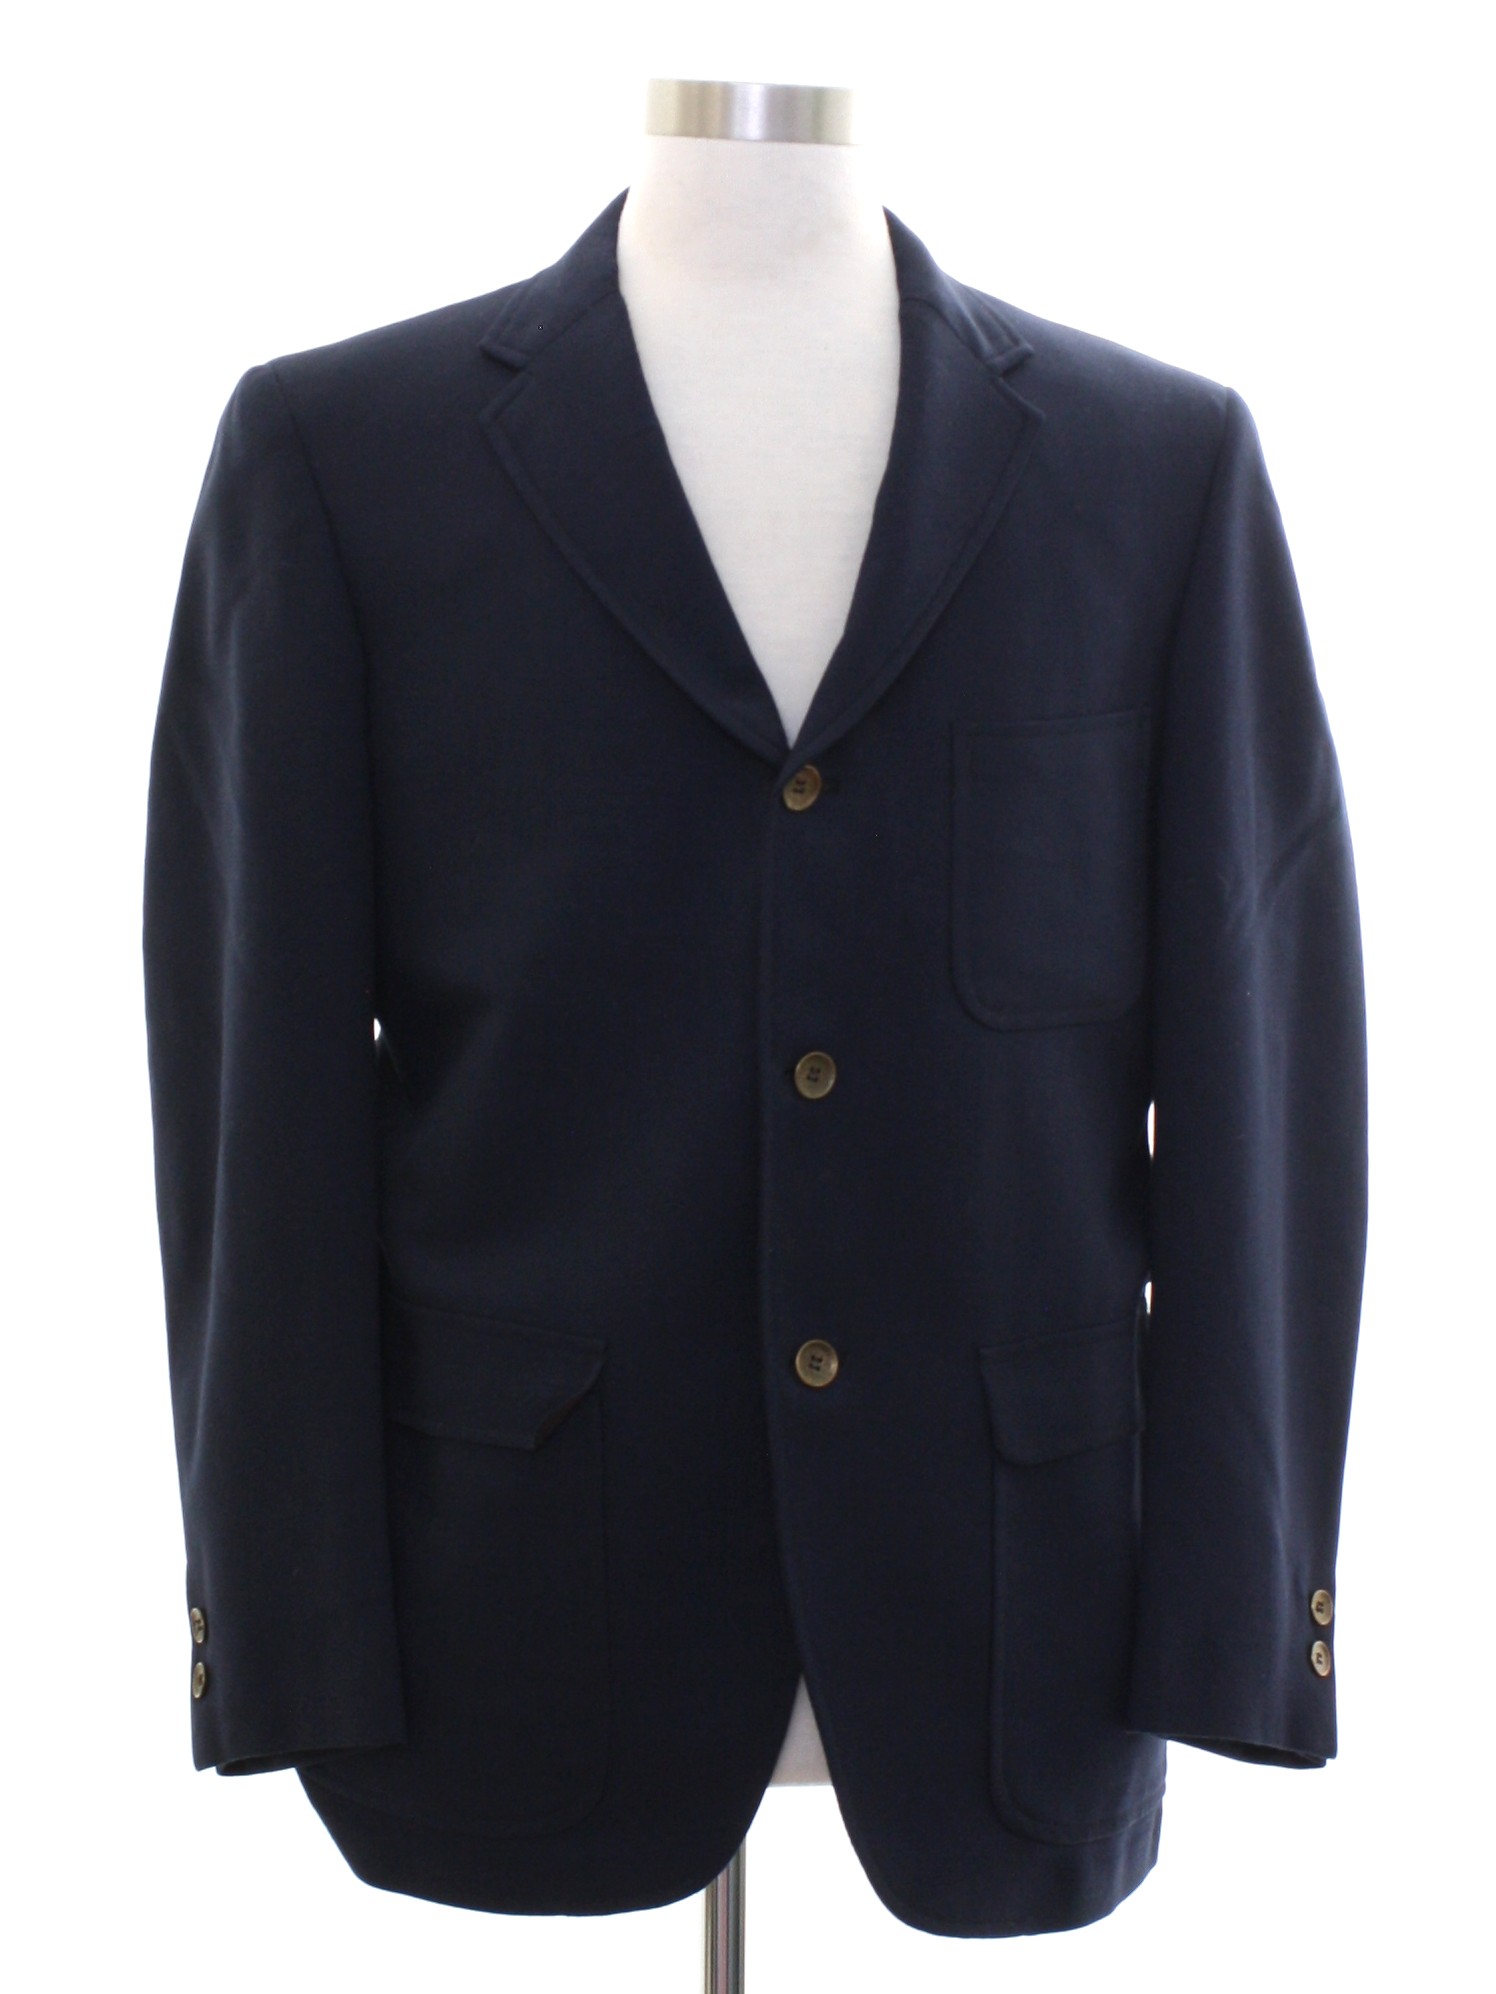 Retro 1960s Jacket: 60s -Label Missing- Mens navy blue blended acrylic ...